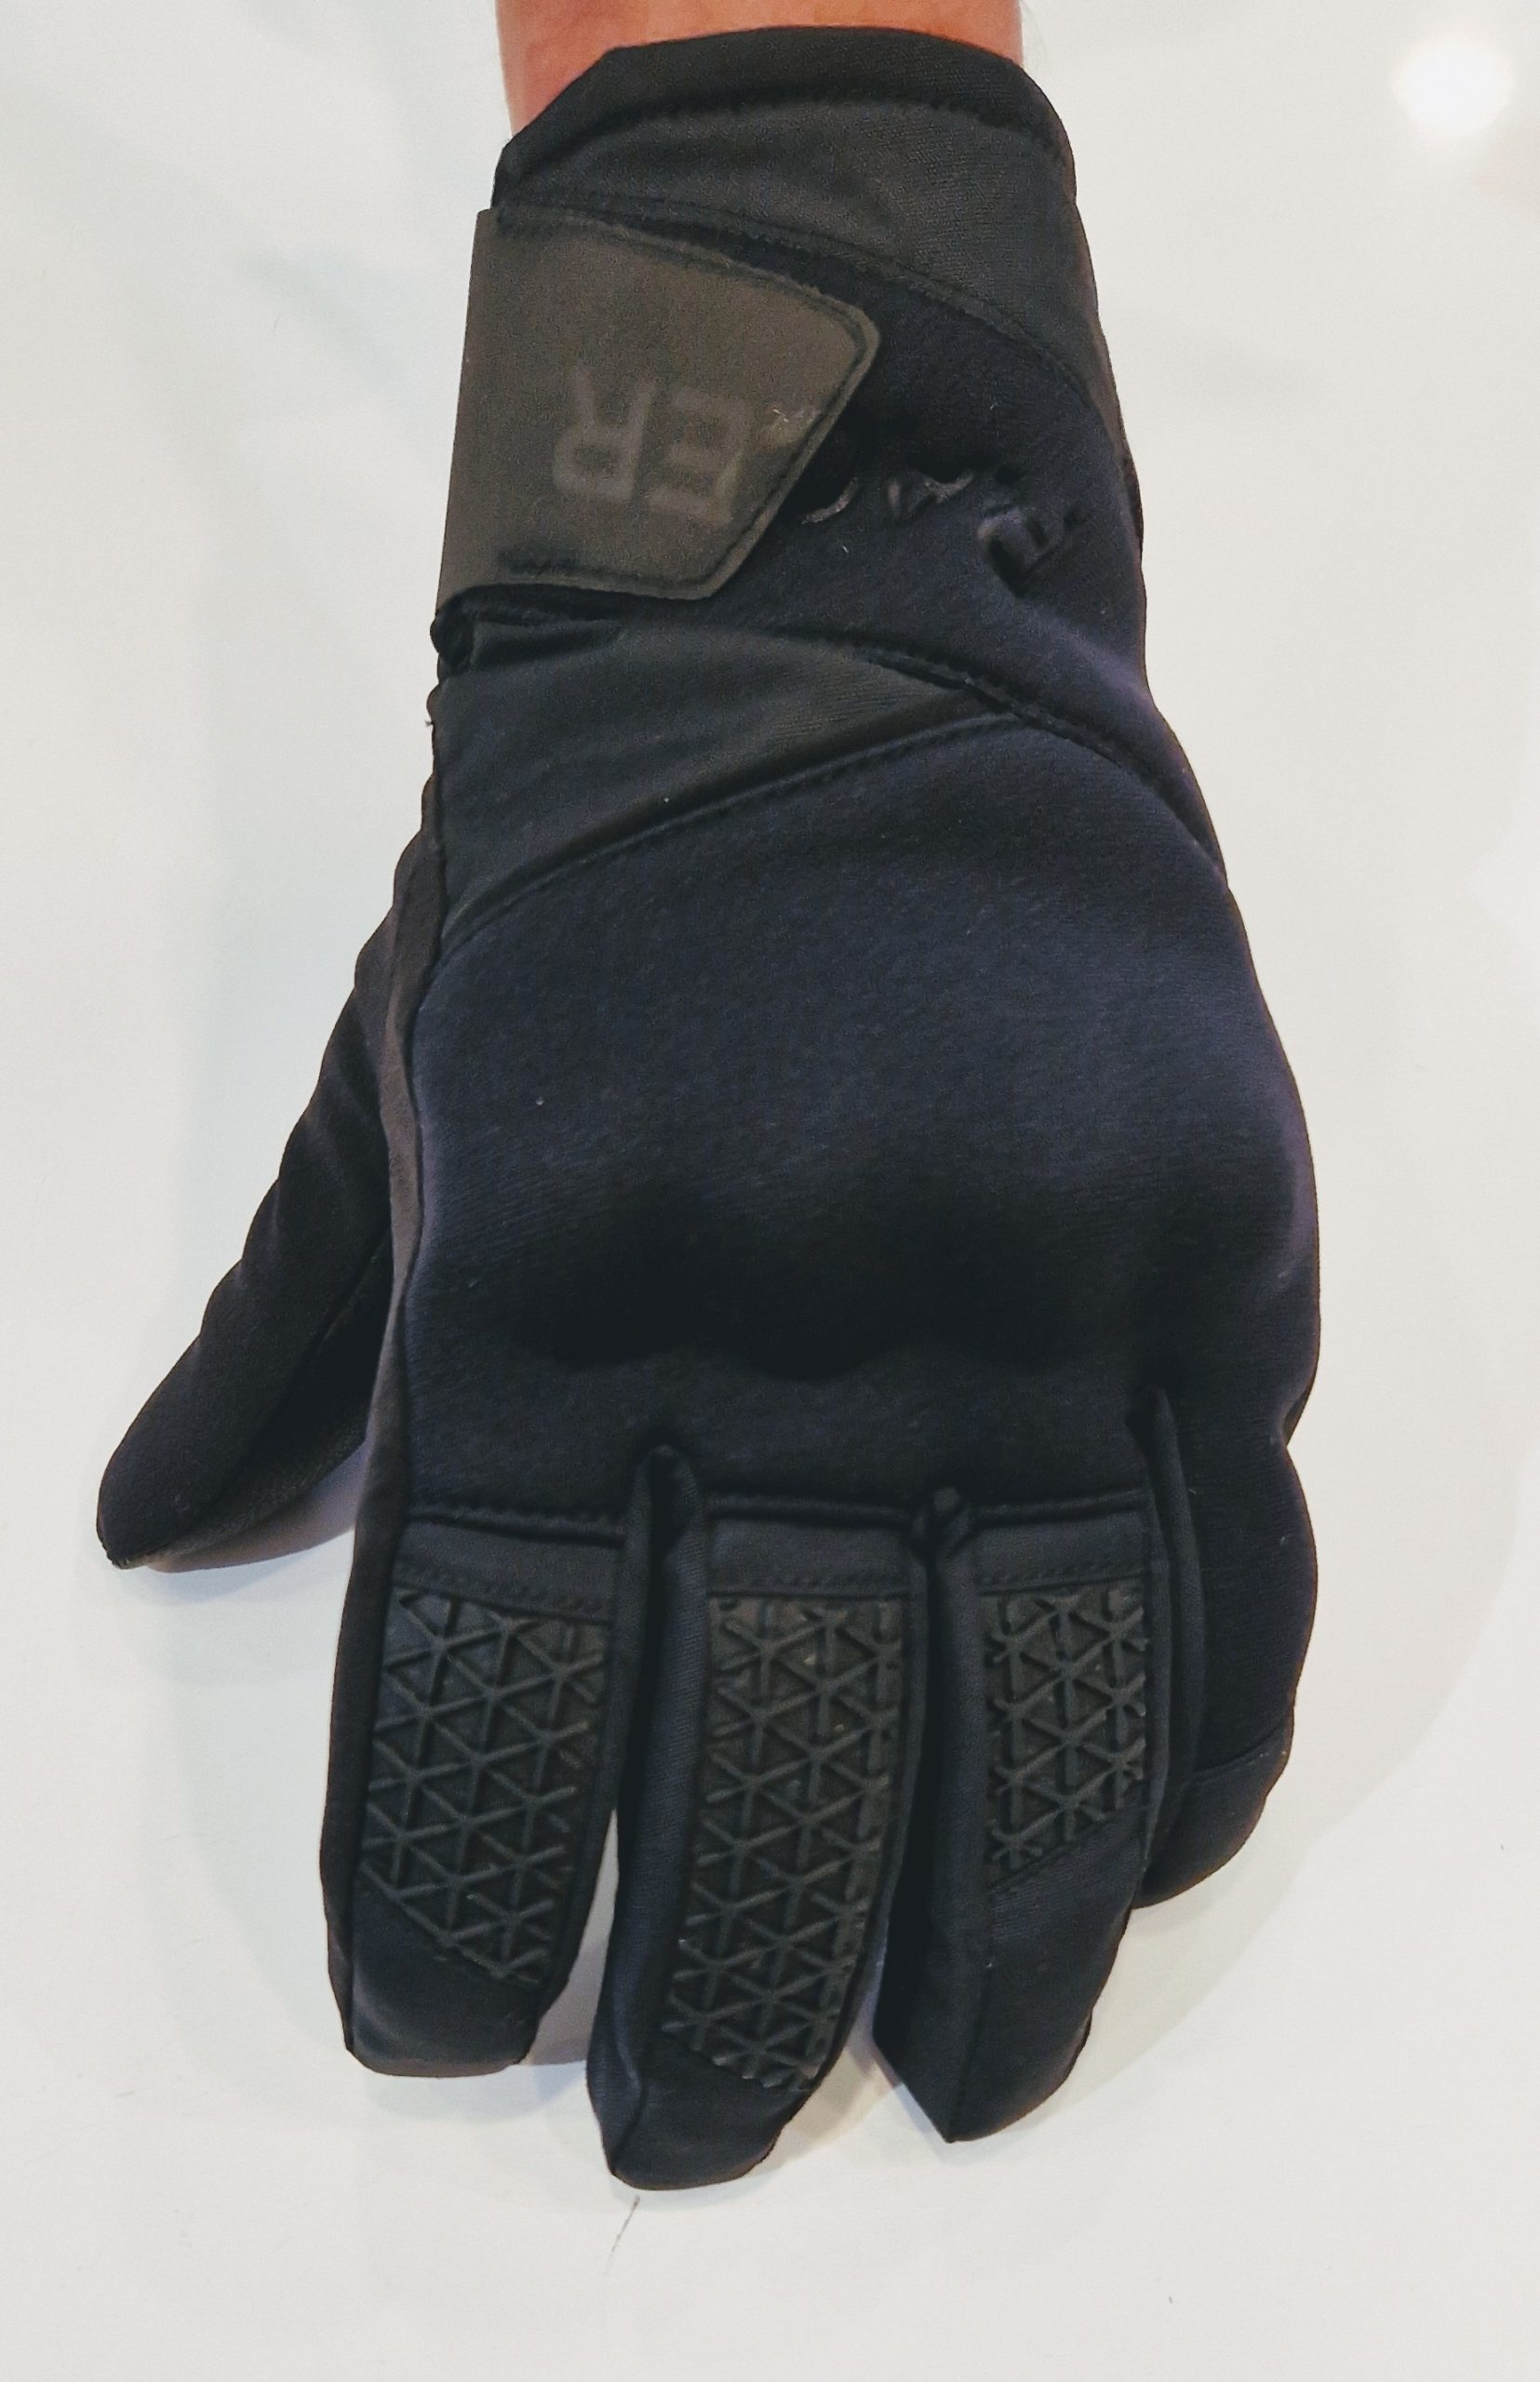 Taille gants moto - Guide tailles